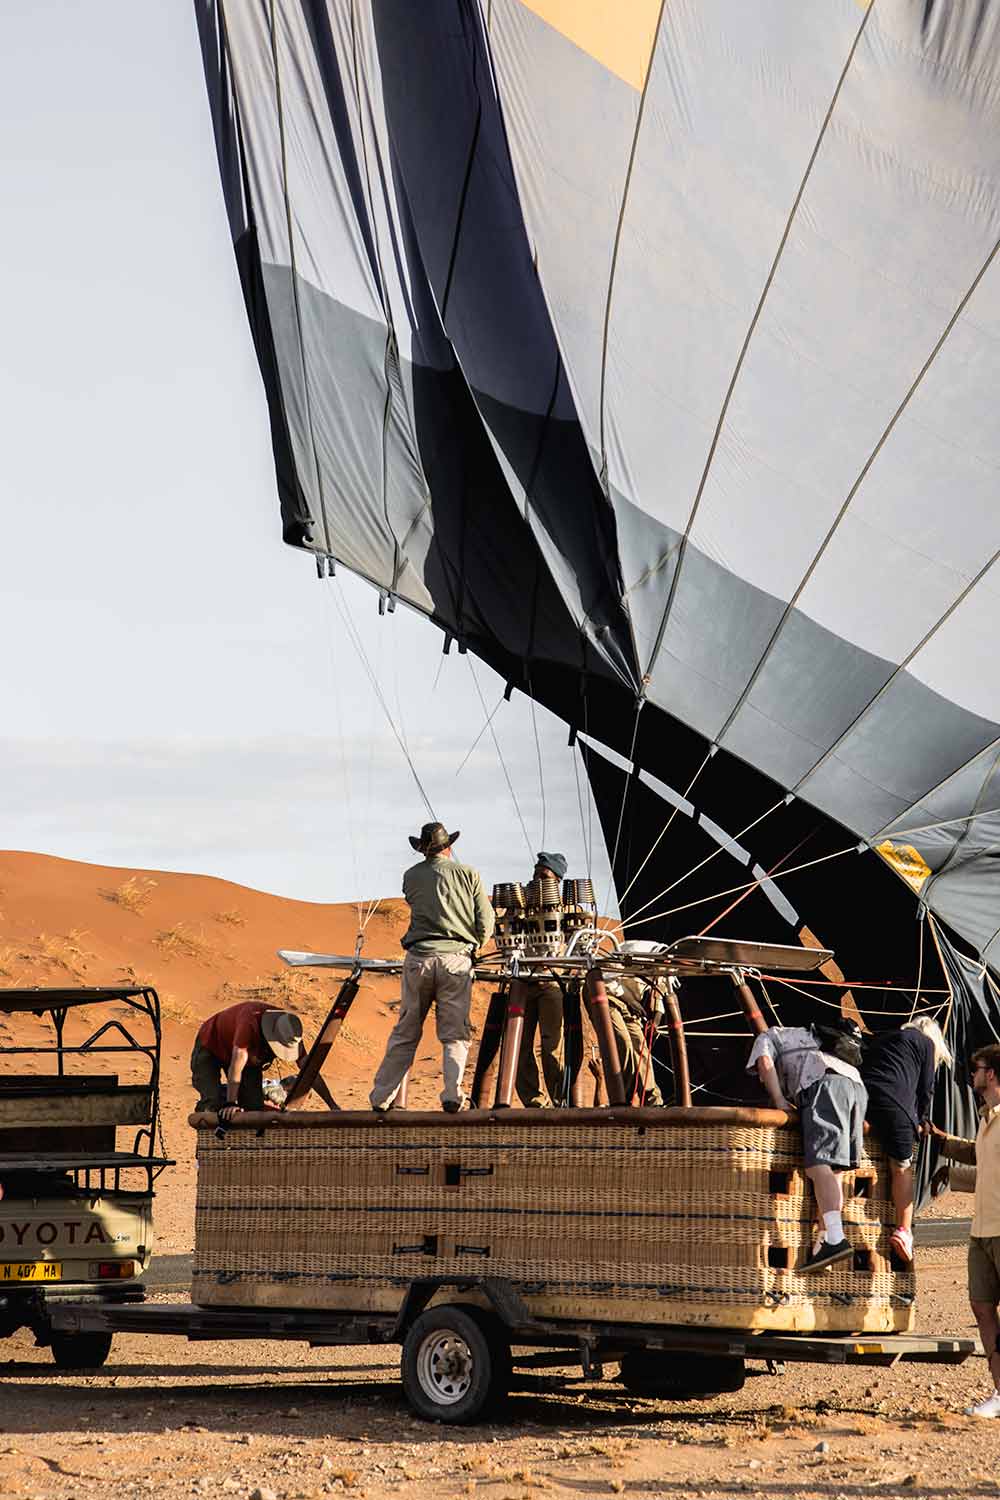 Packing up the air balloon after enjoying a one hour scenic flight over the Sossusvlei dunes.